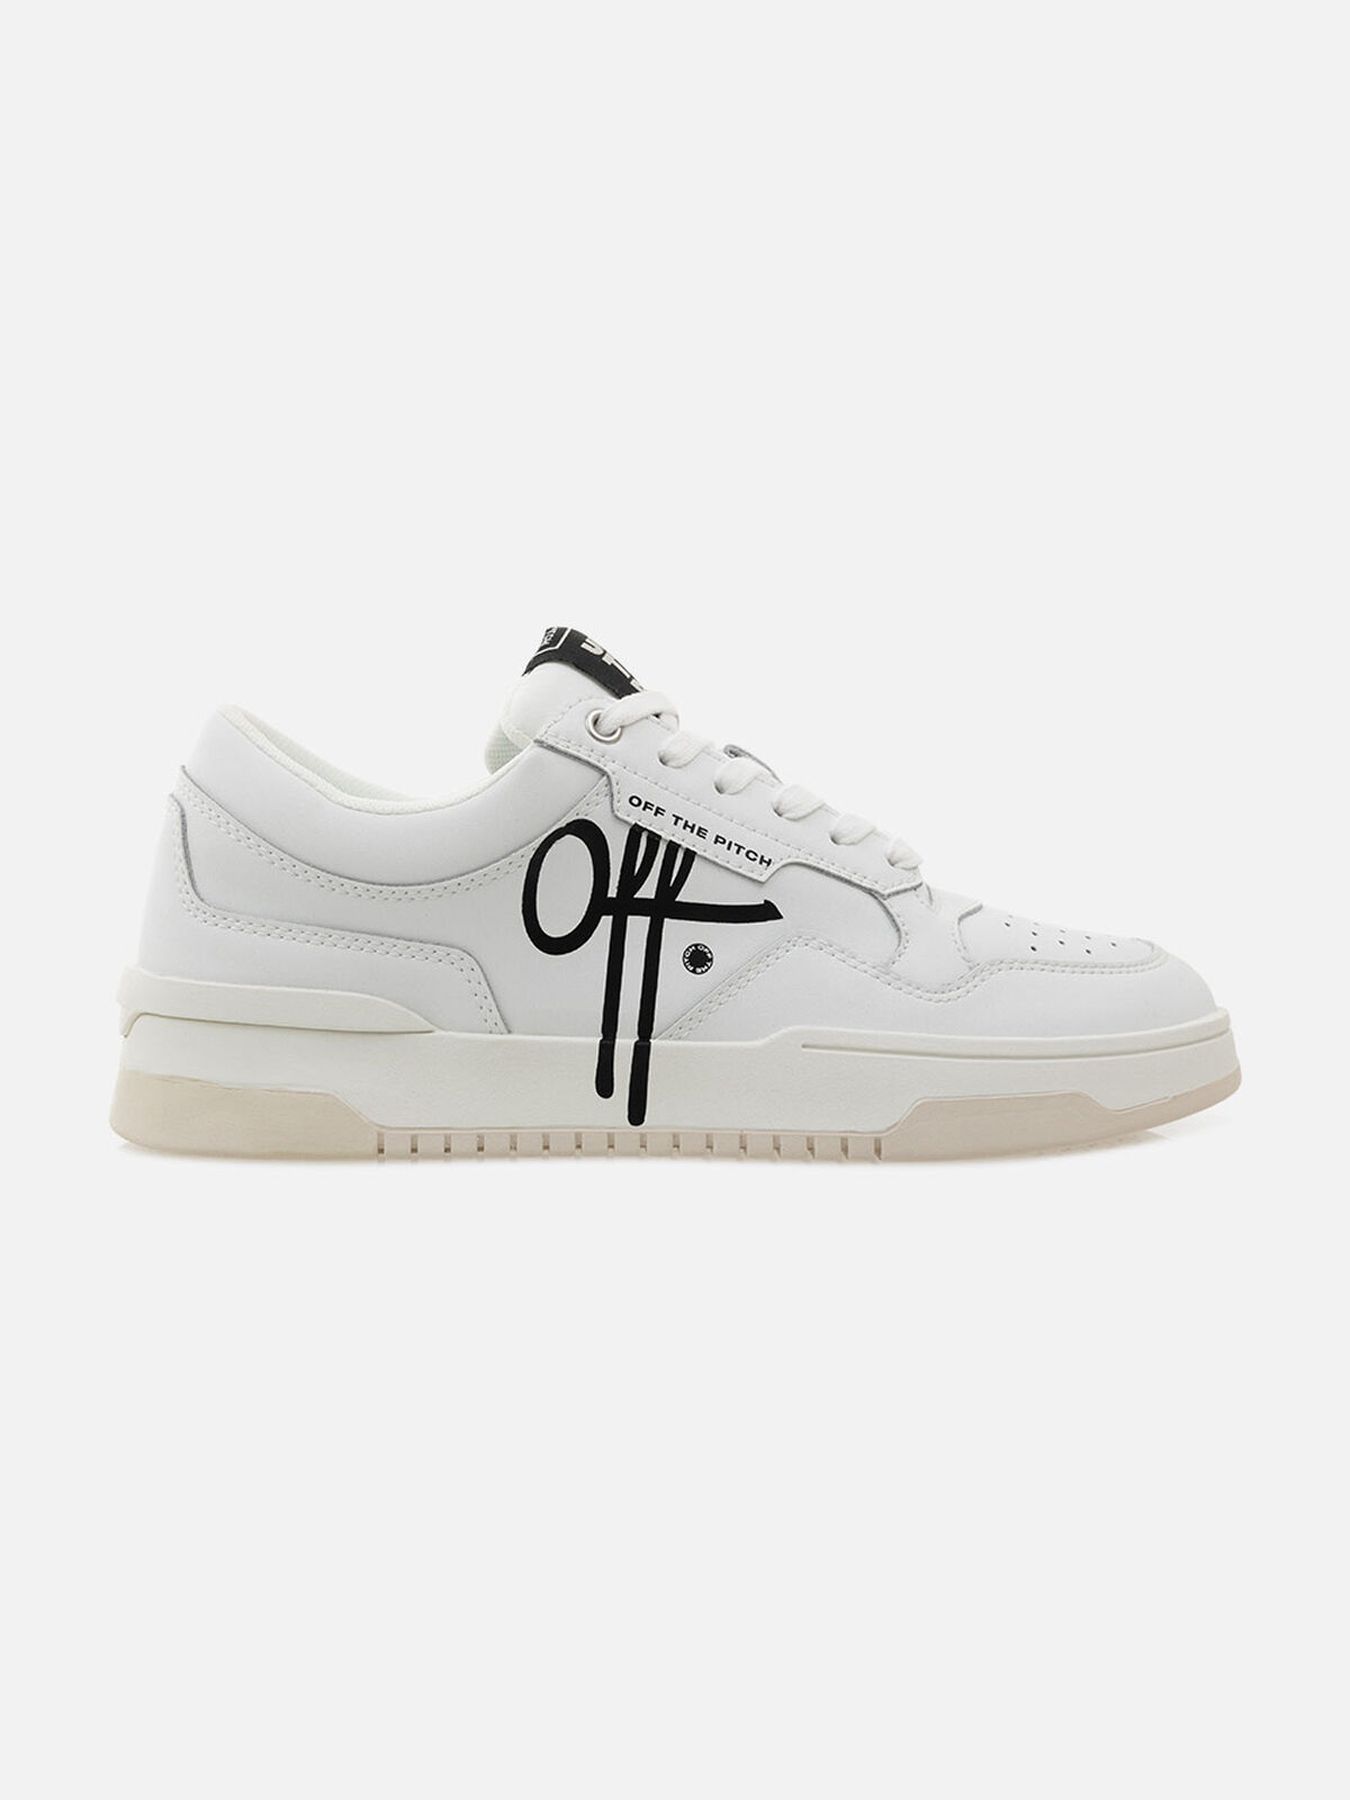 Off The Pitch Full Stop White/black 00107567-102